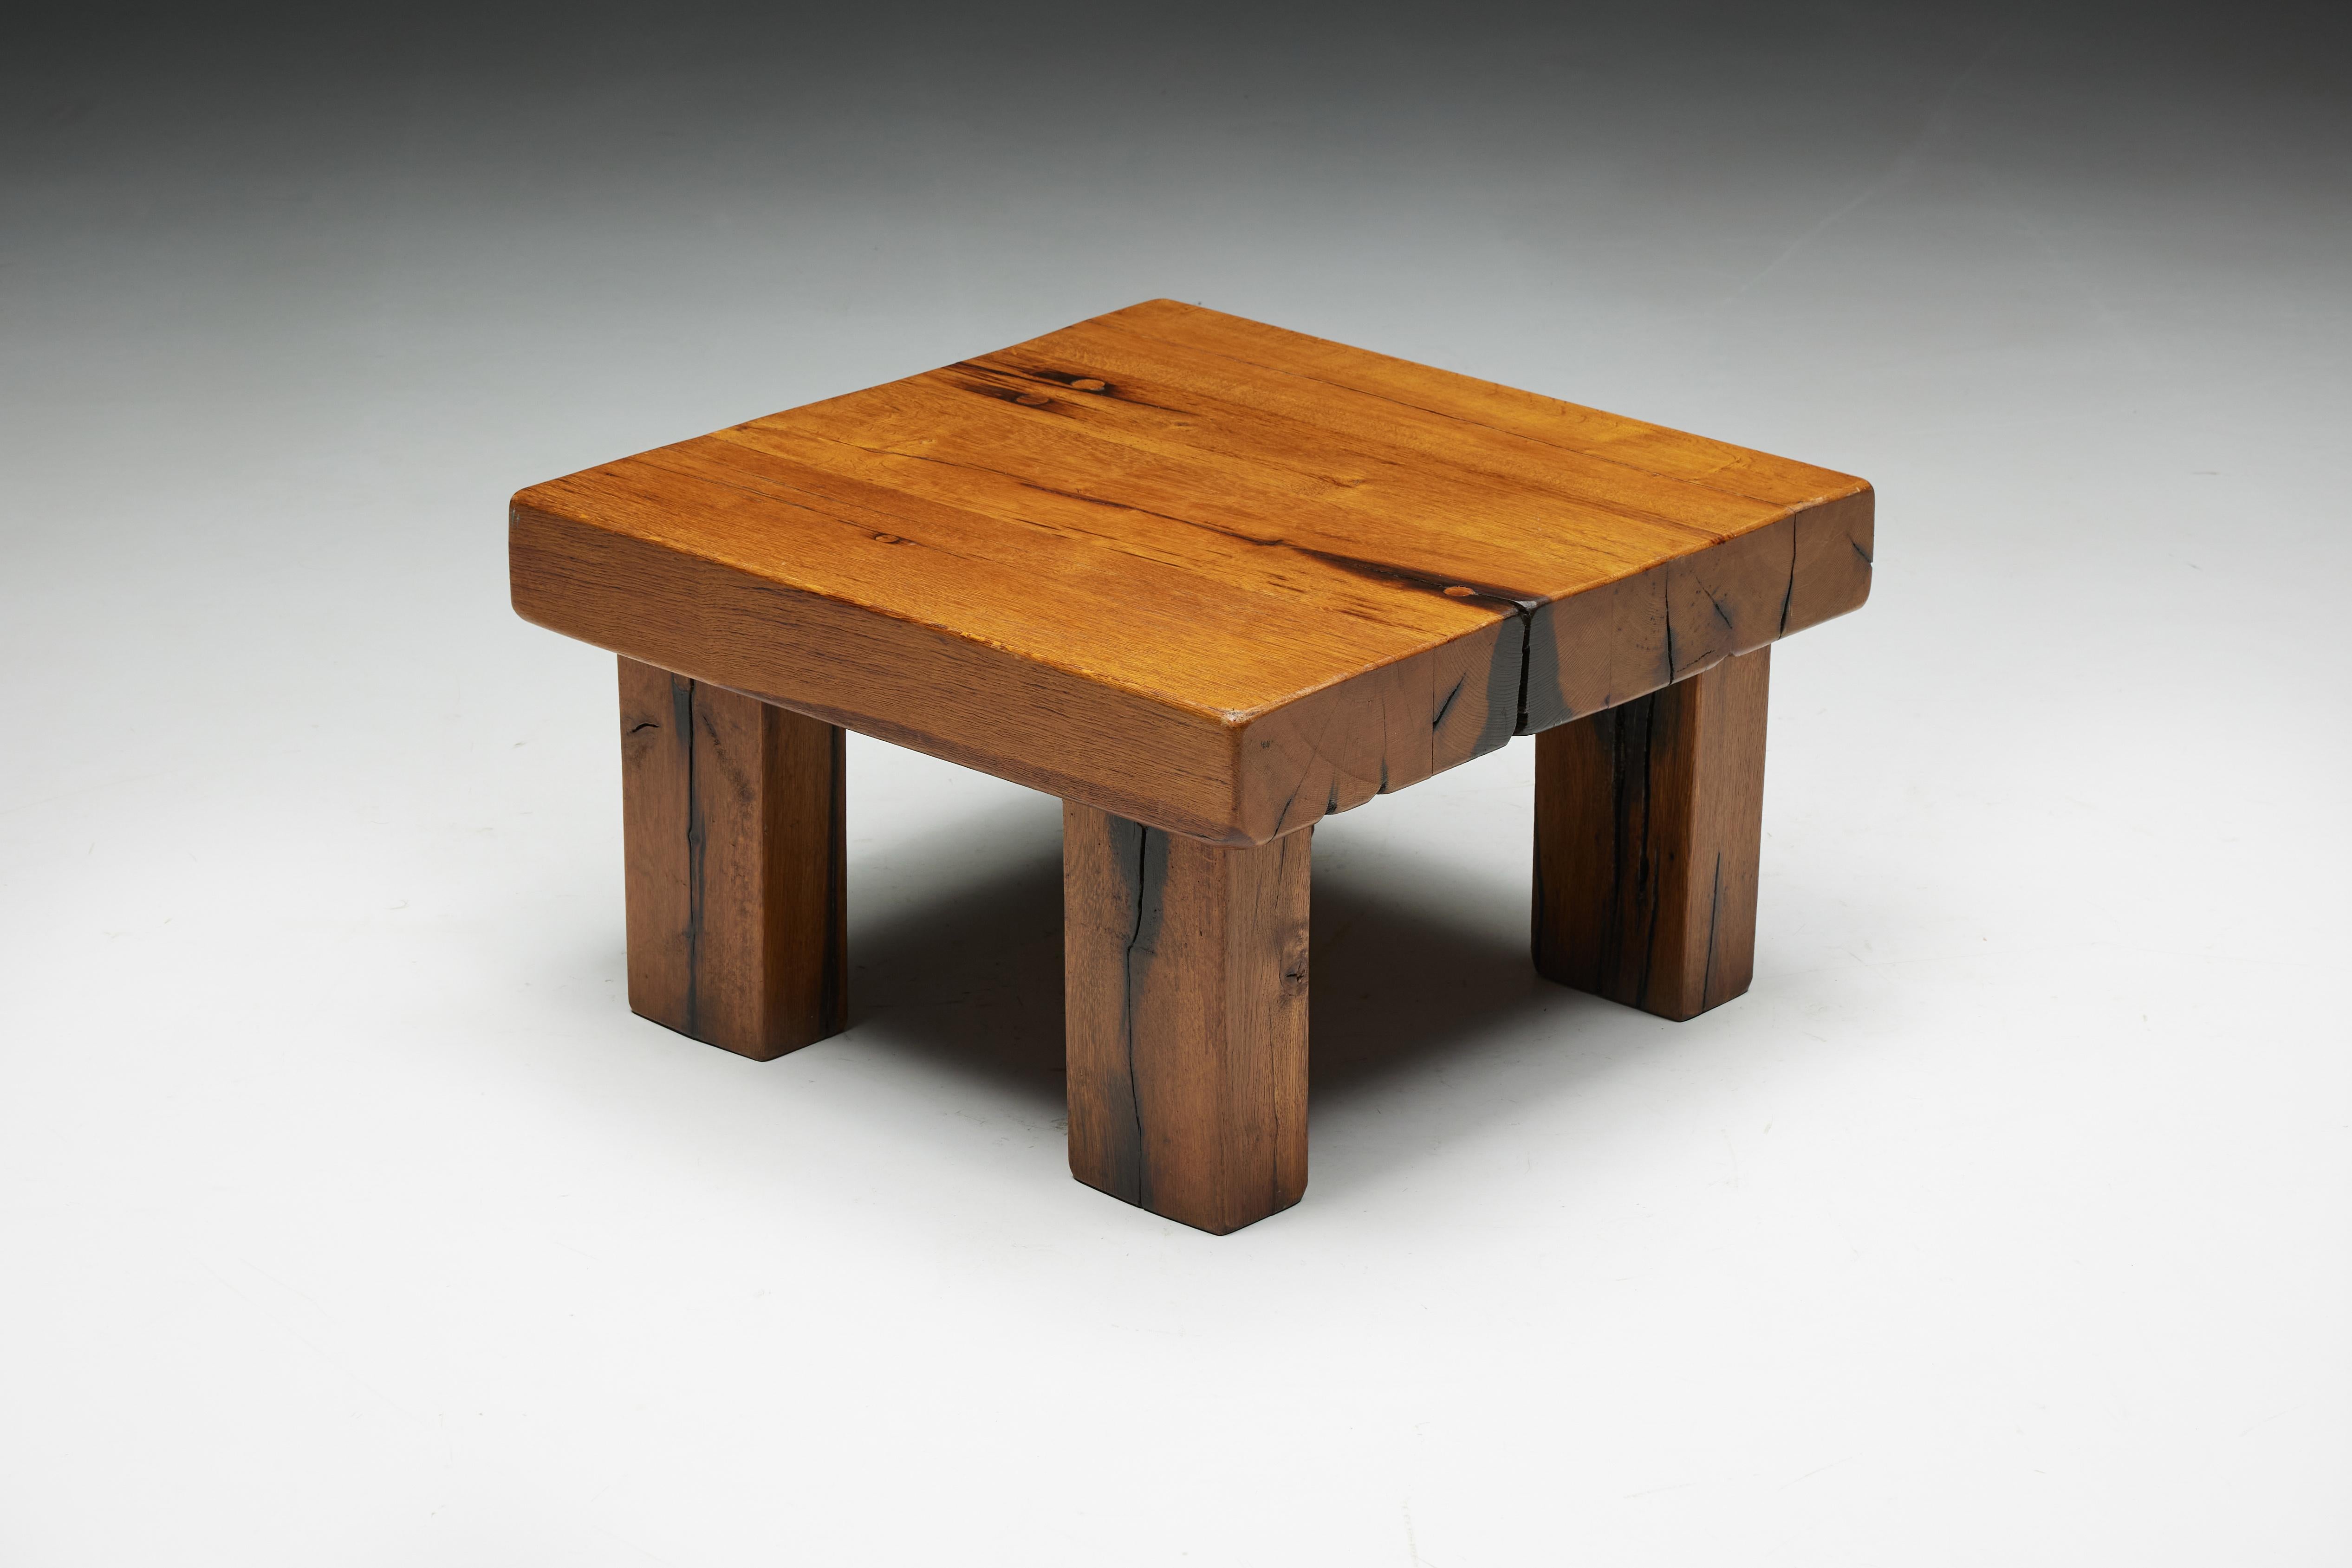 Wood Brutalist Square Coffee Table, France, 1950s For Sale